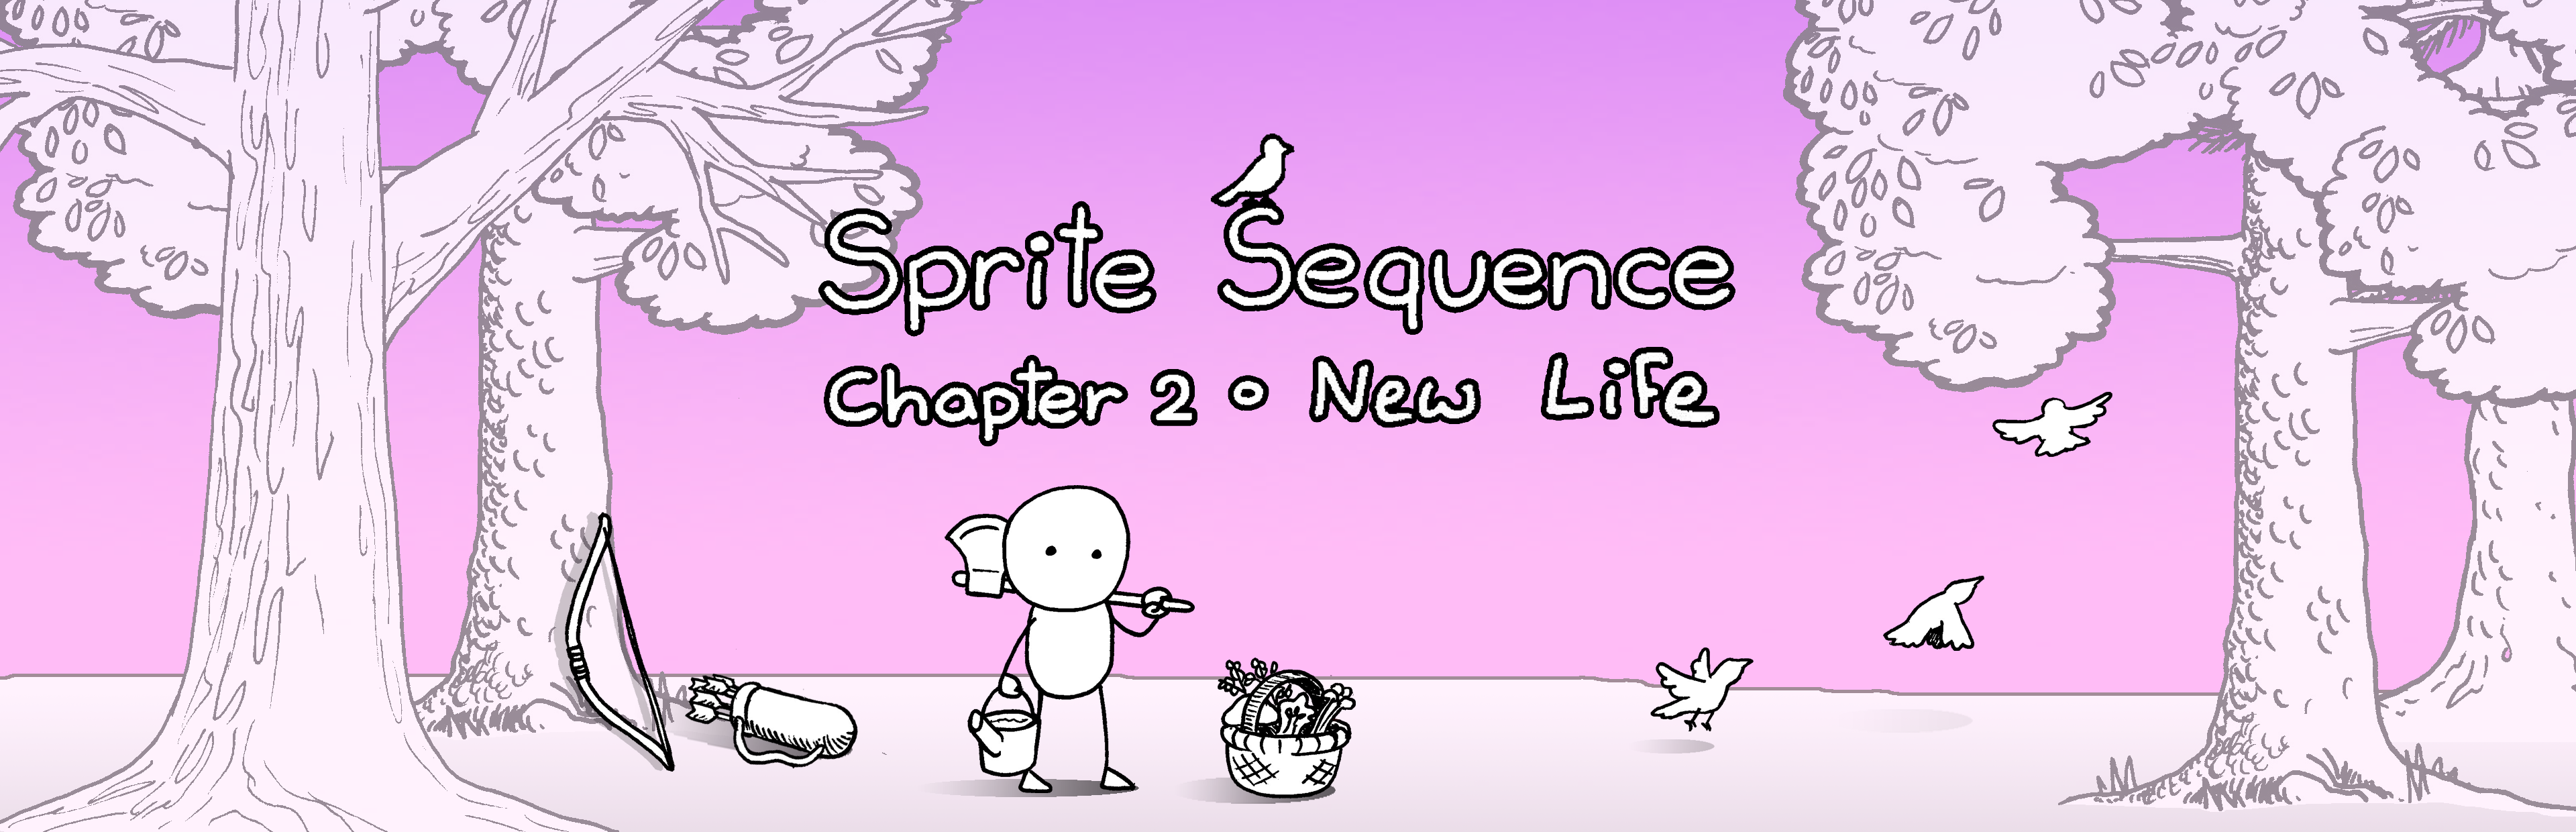 Chapter 2 - New Life